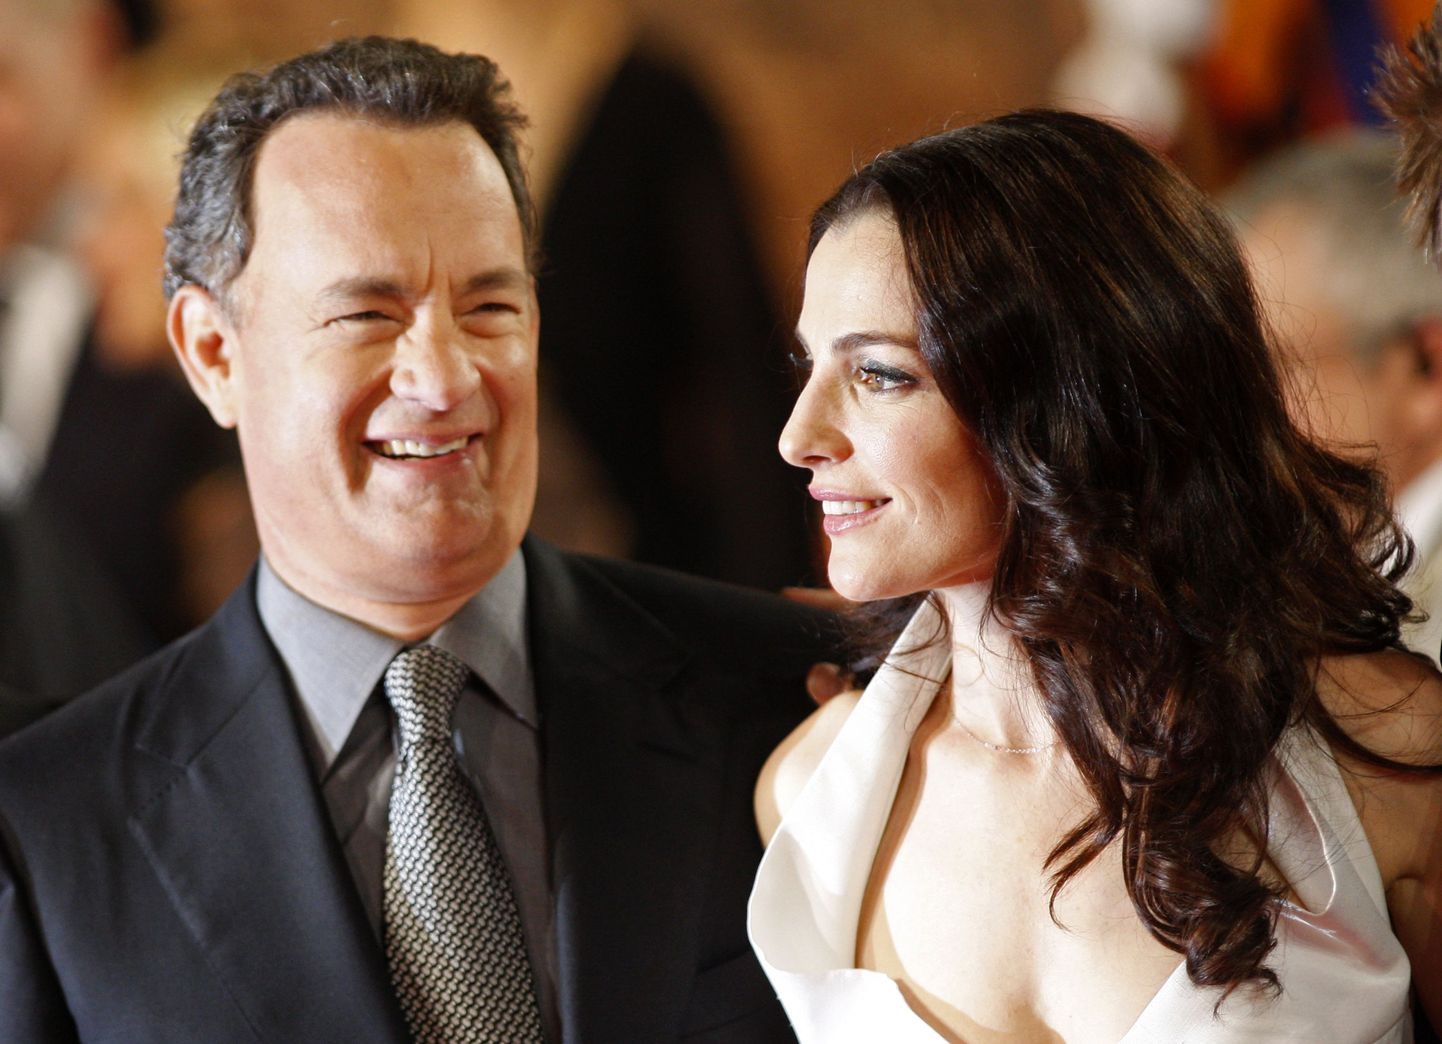 Actor Tom Hanks and Israeli actress Ayelet Zurer (R) arrive at the world premiere of the movie "Angels & Demons" in Rome May 4, 2009. REUTERS/Tony Gentile  (ITALY ENTERTAINMENT)